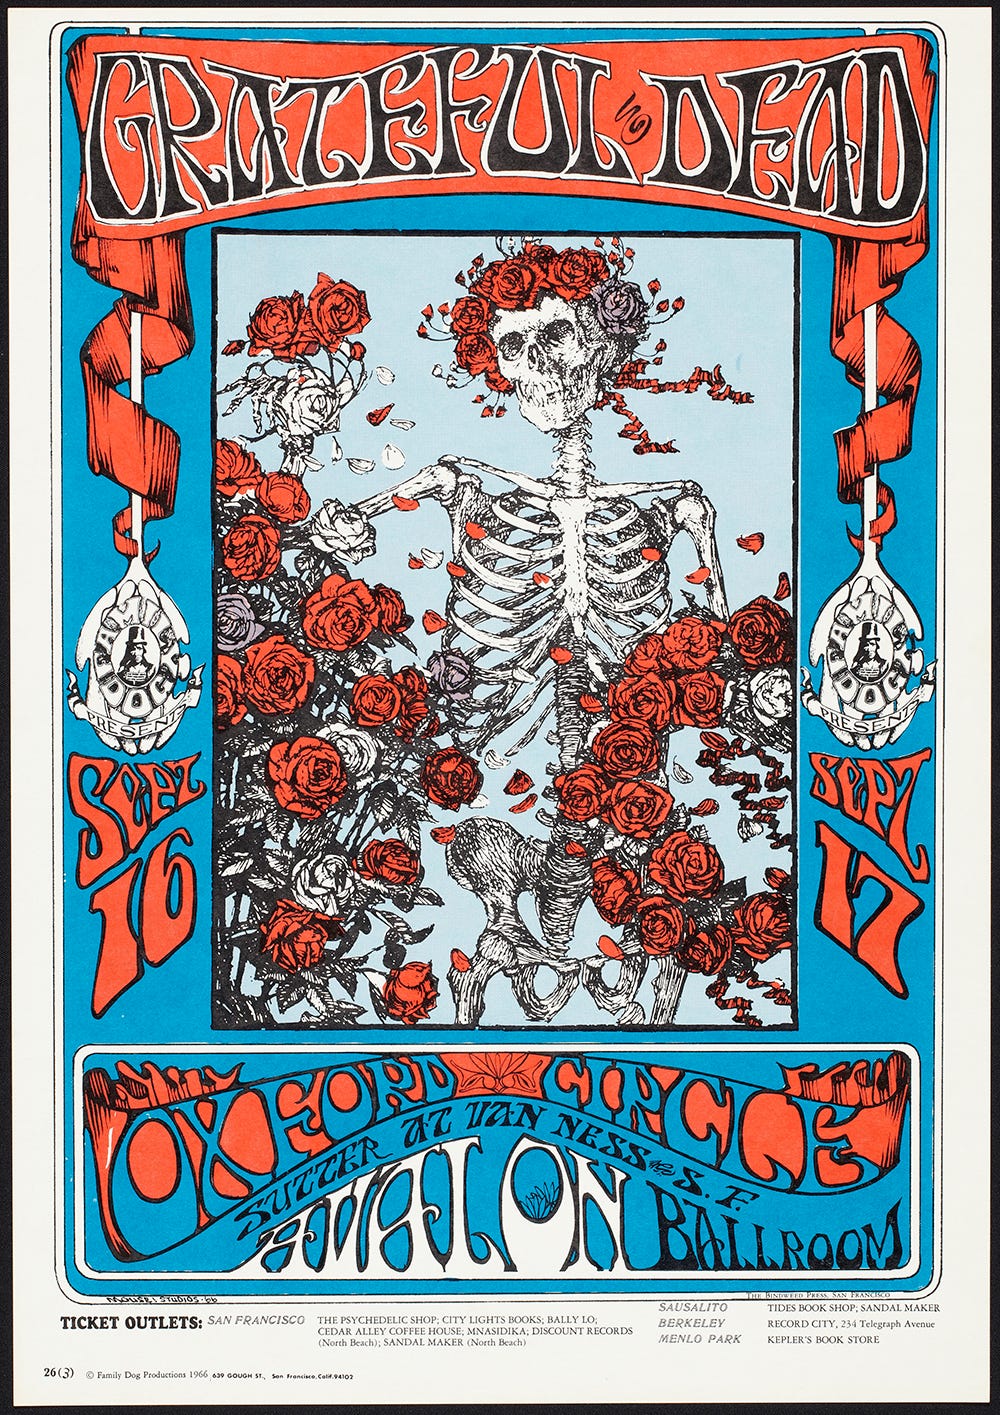 Red, blue, purple, and black drawn poster of skeleton surrounded by roses, holding a wreath of roses and wearing a wreath of roses.